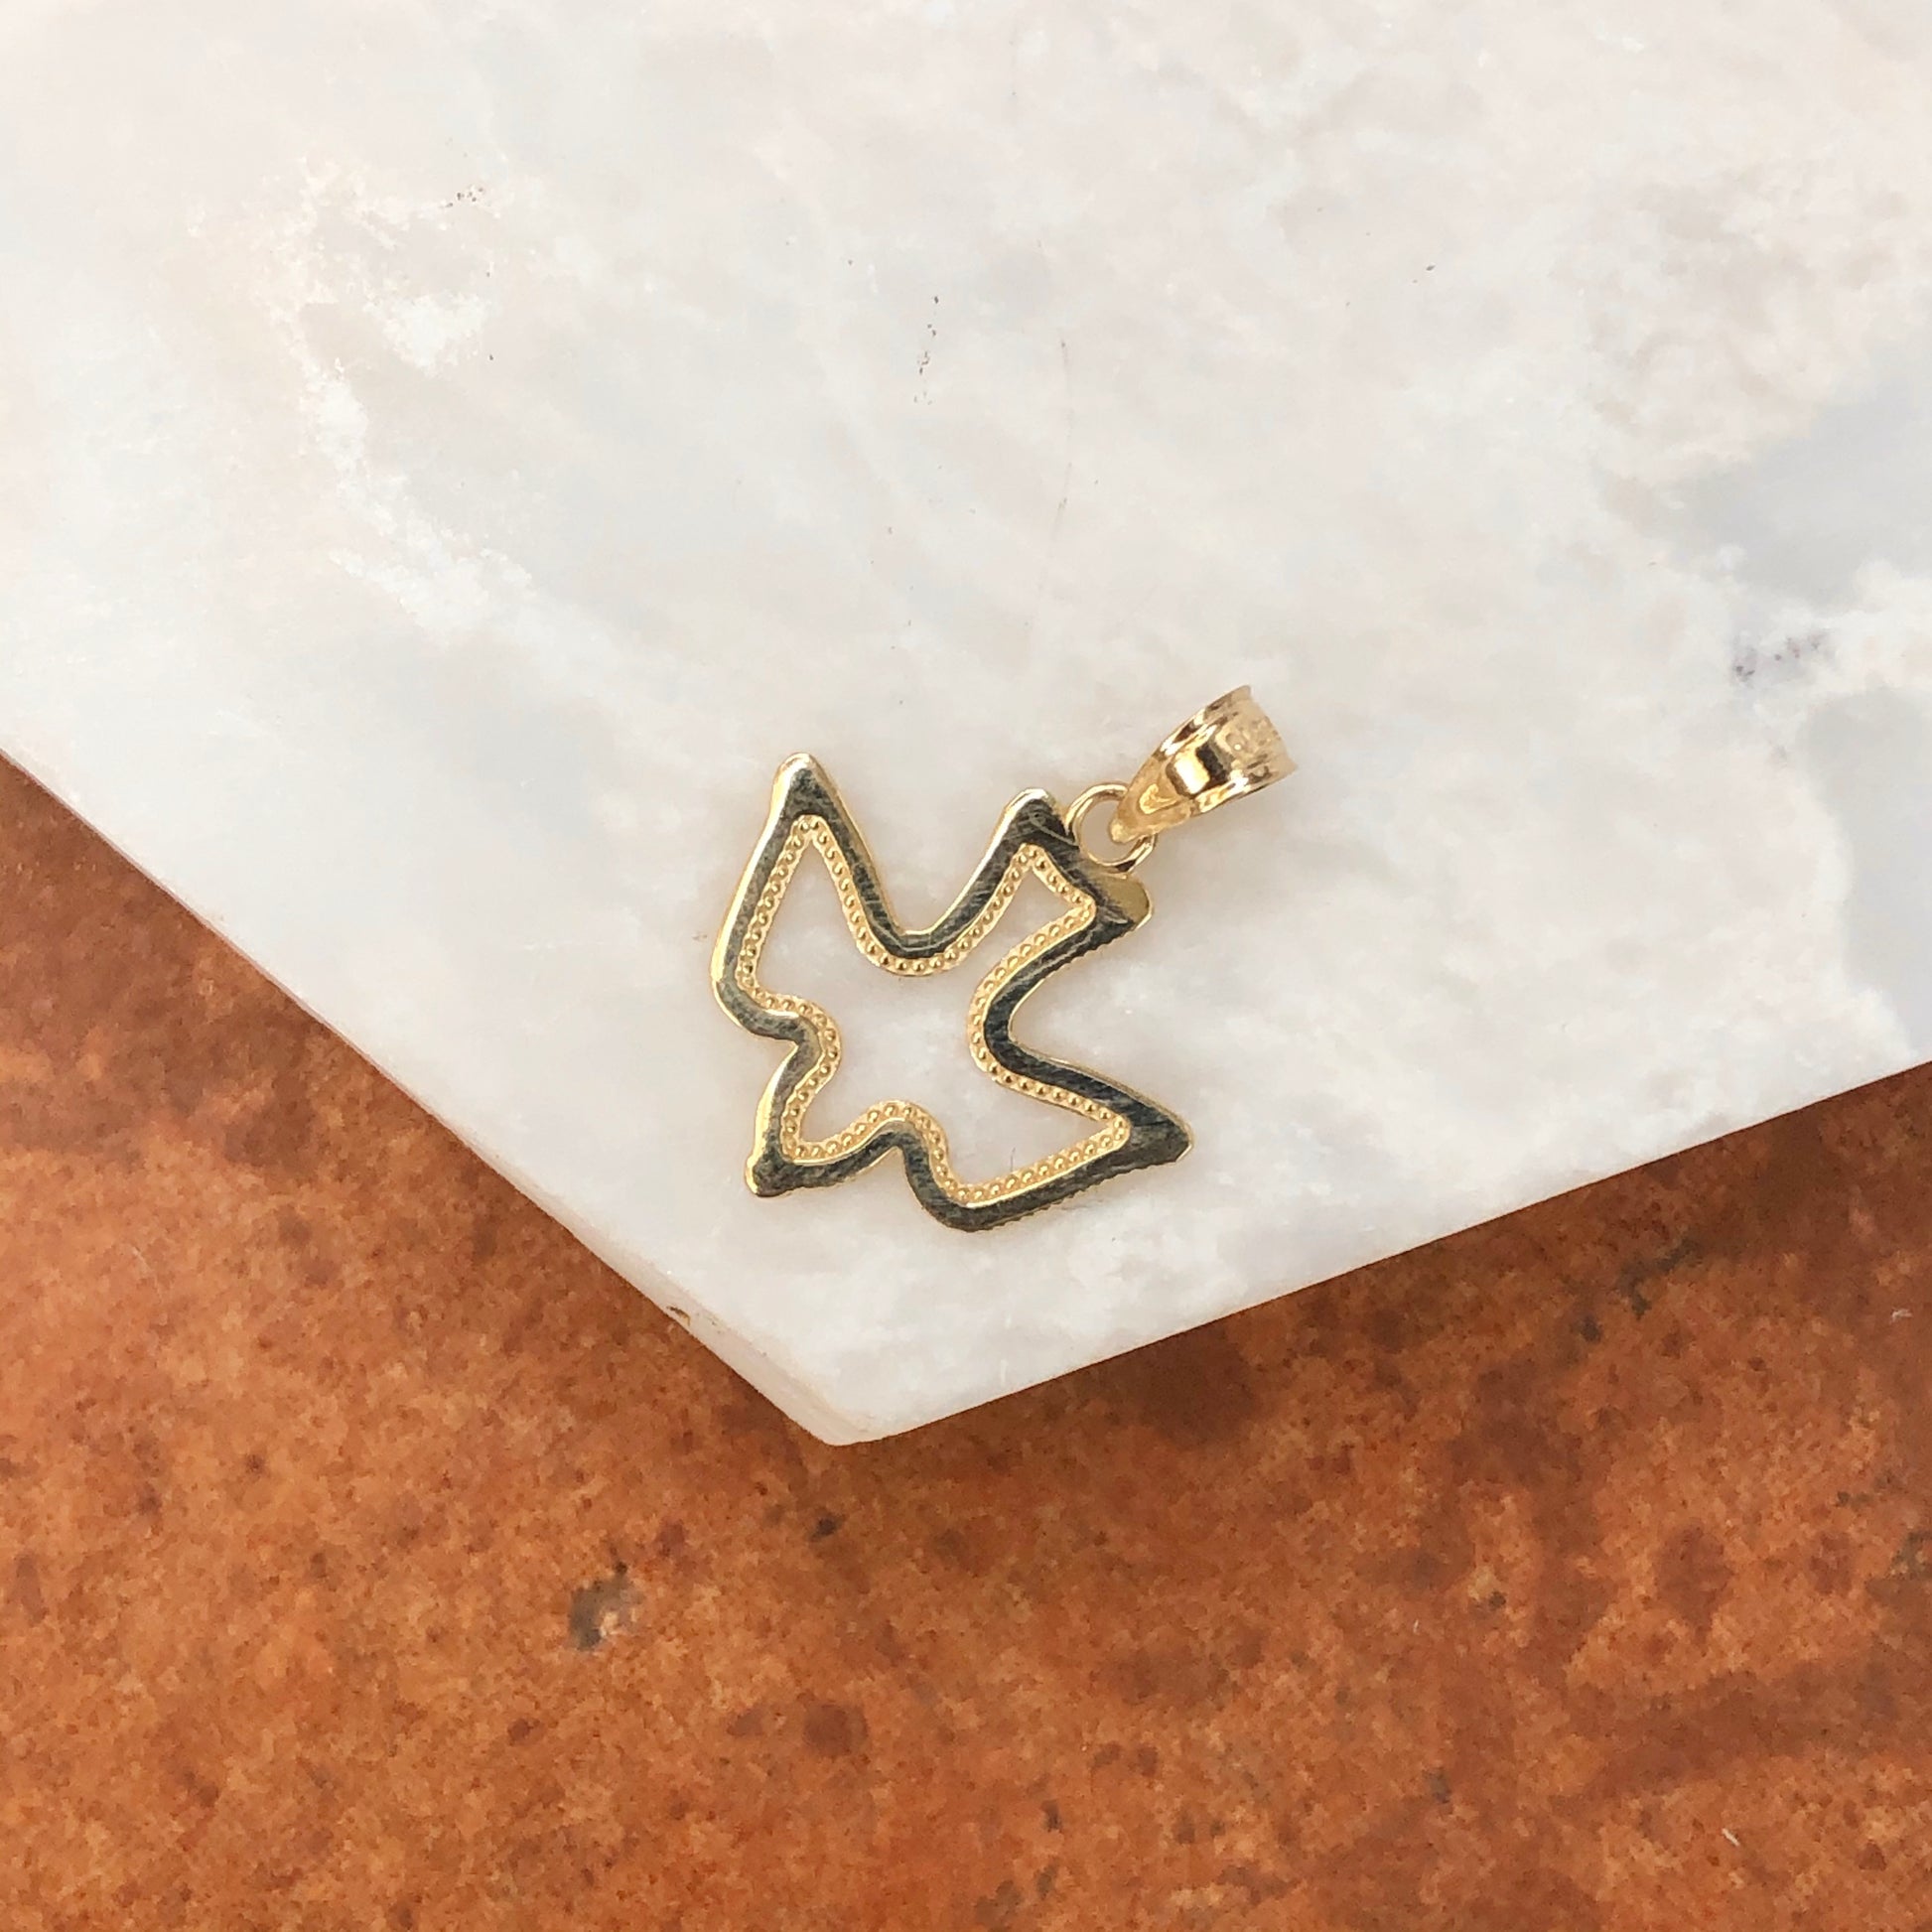 10KT Yellow Gold Cut-Out Dove Pendant Charm, 10KT Yellow Gold Cut-Out Dove Pendant Charm - Legacy Saint Jewelry